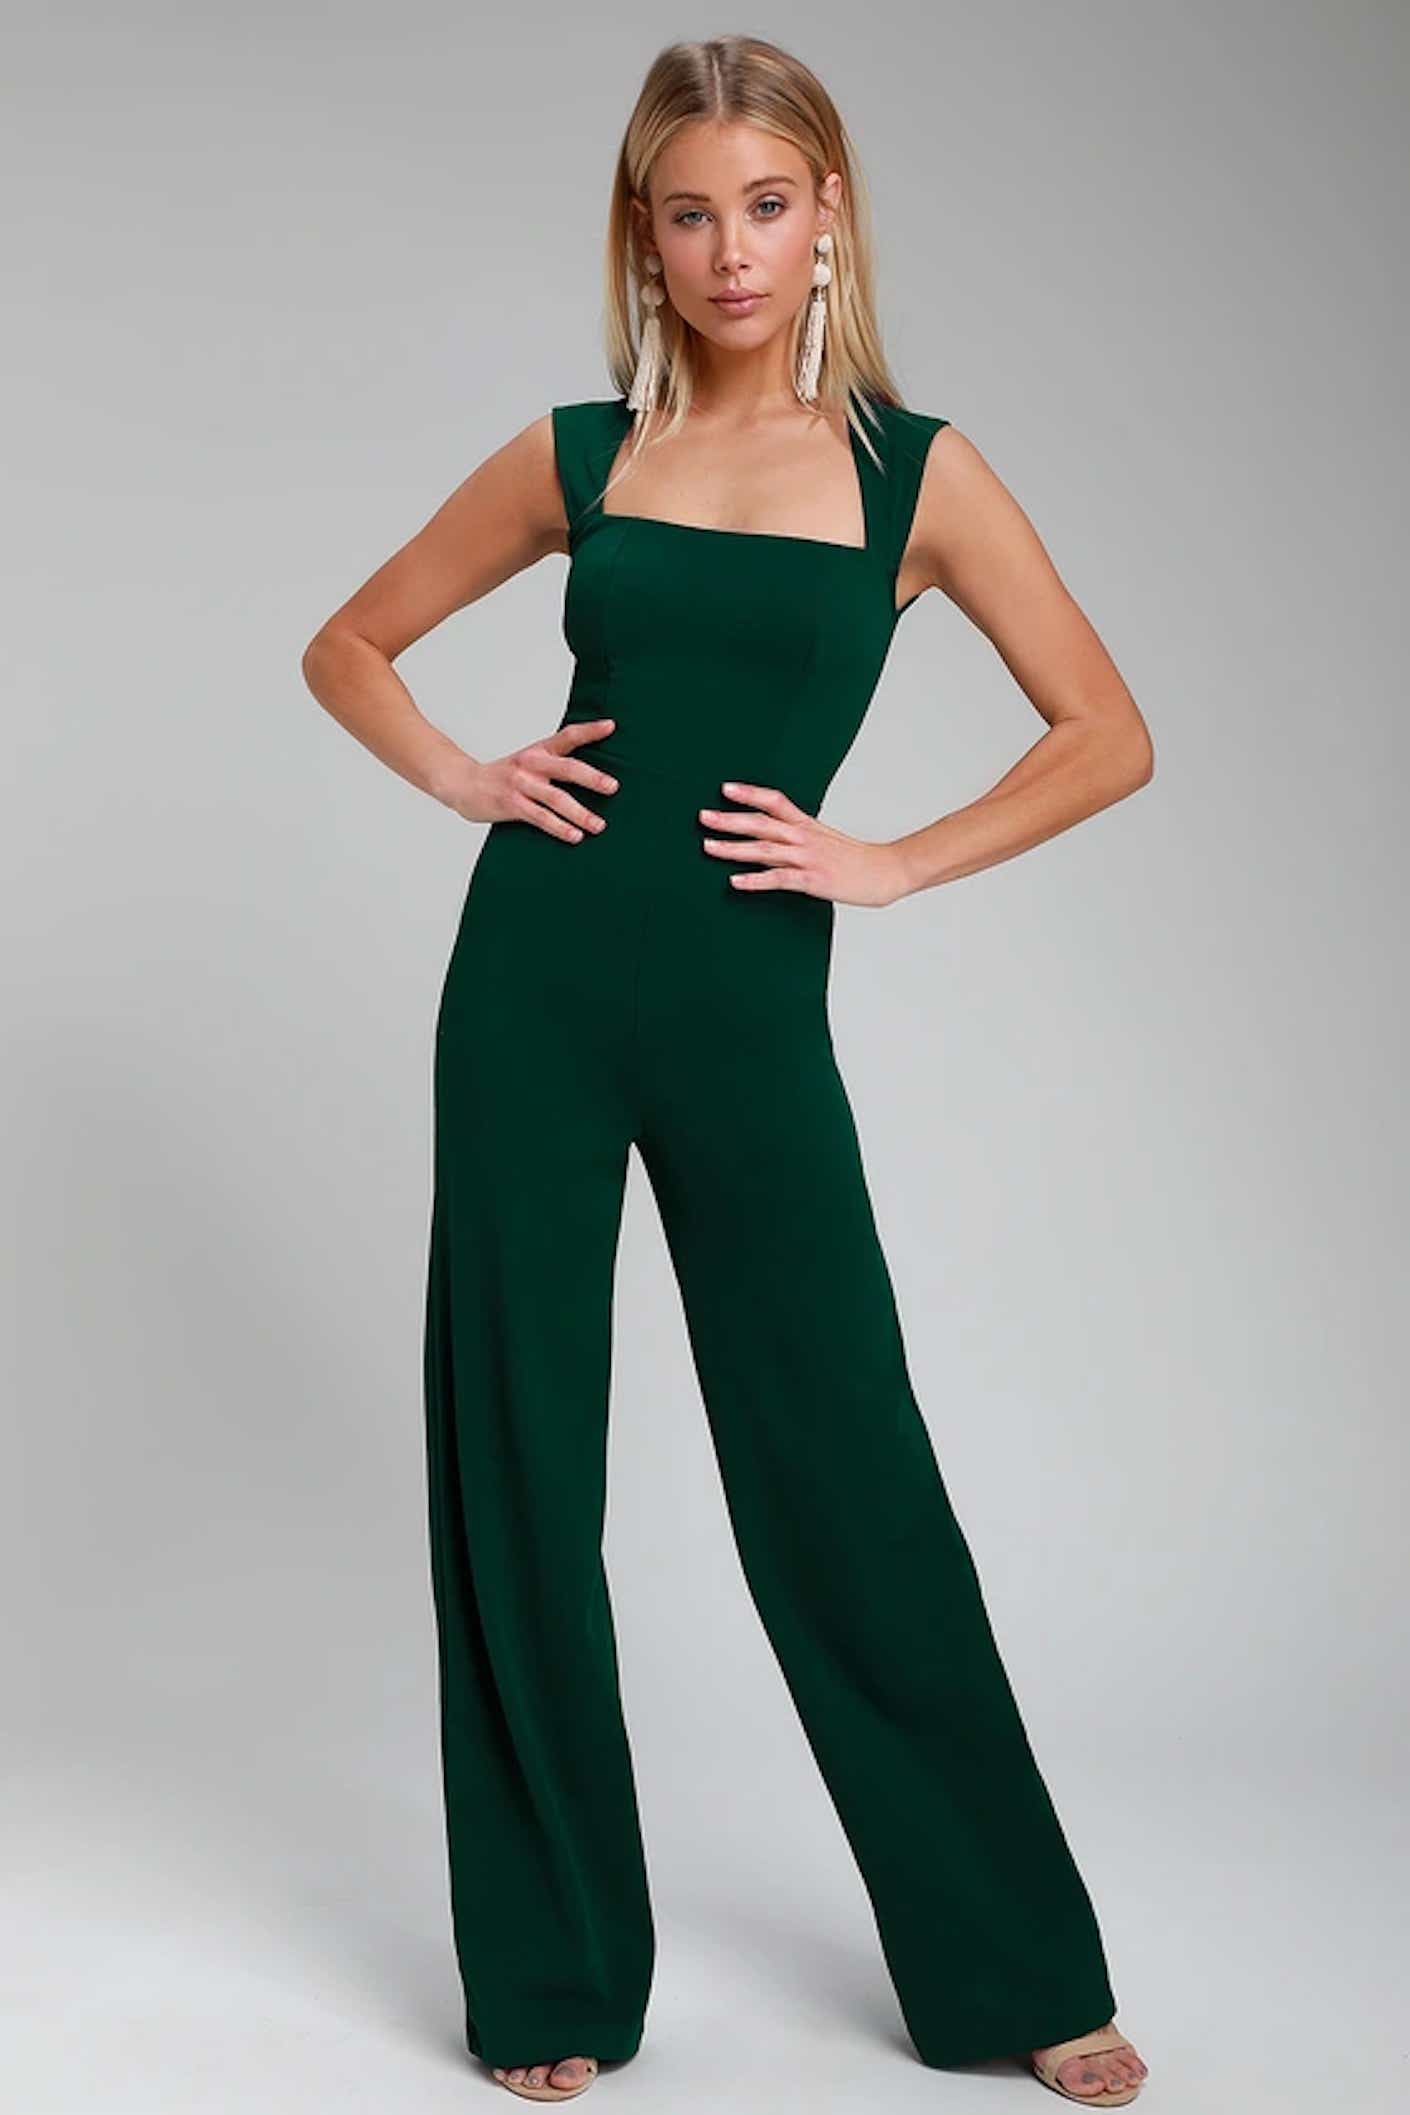 A woman poses with her hands on her hips in a emerald green tank jumpsuit with a square neck.